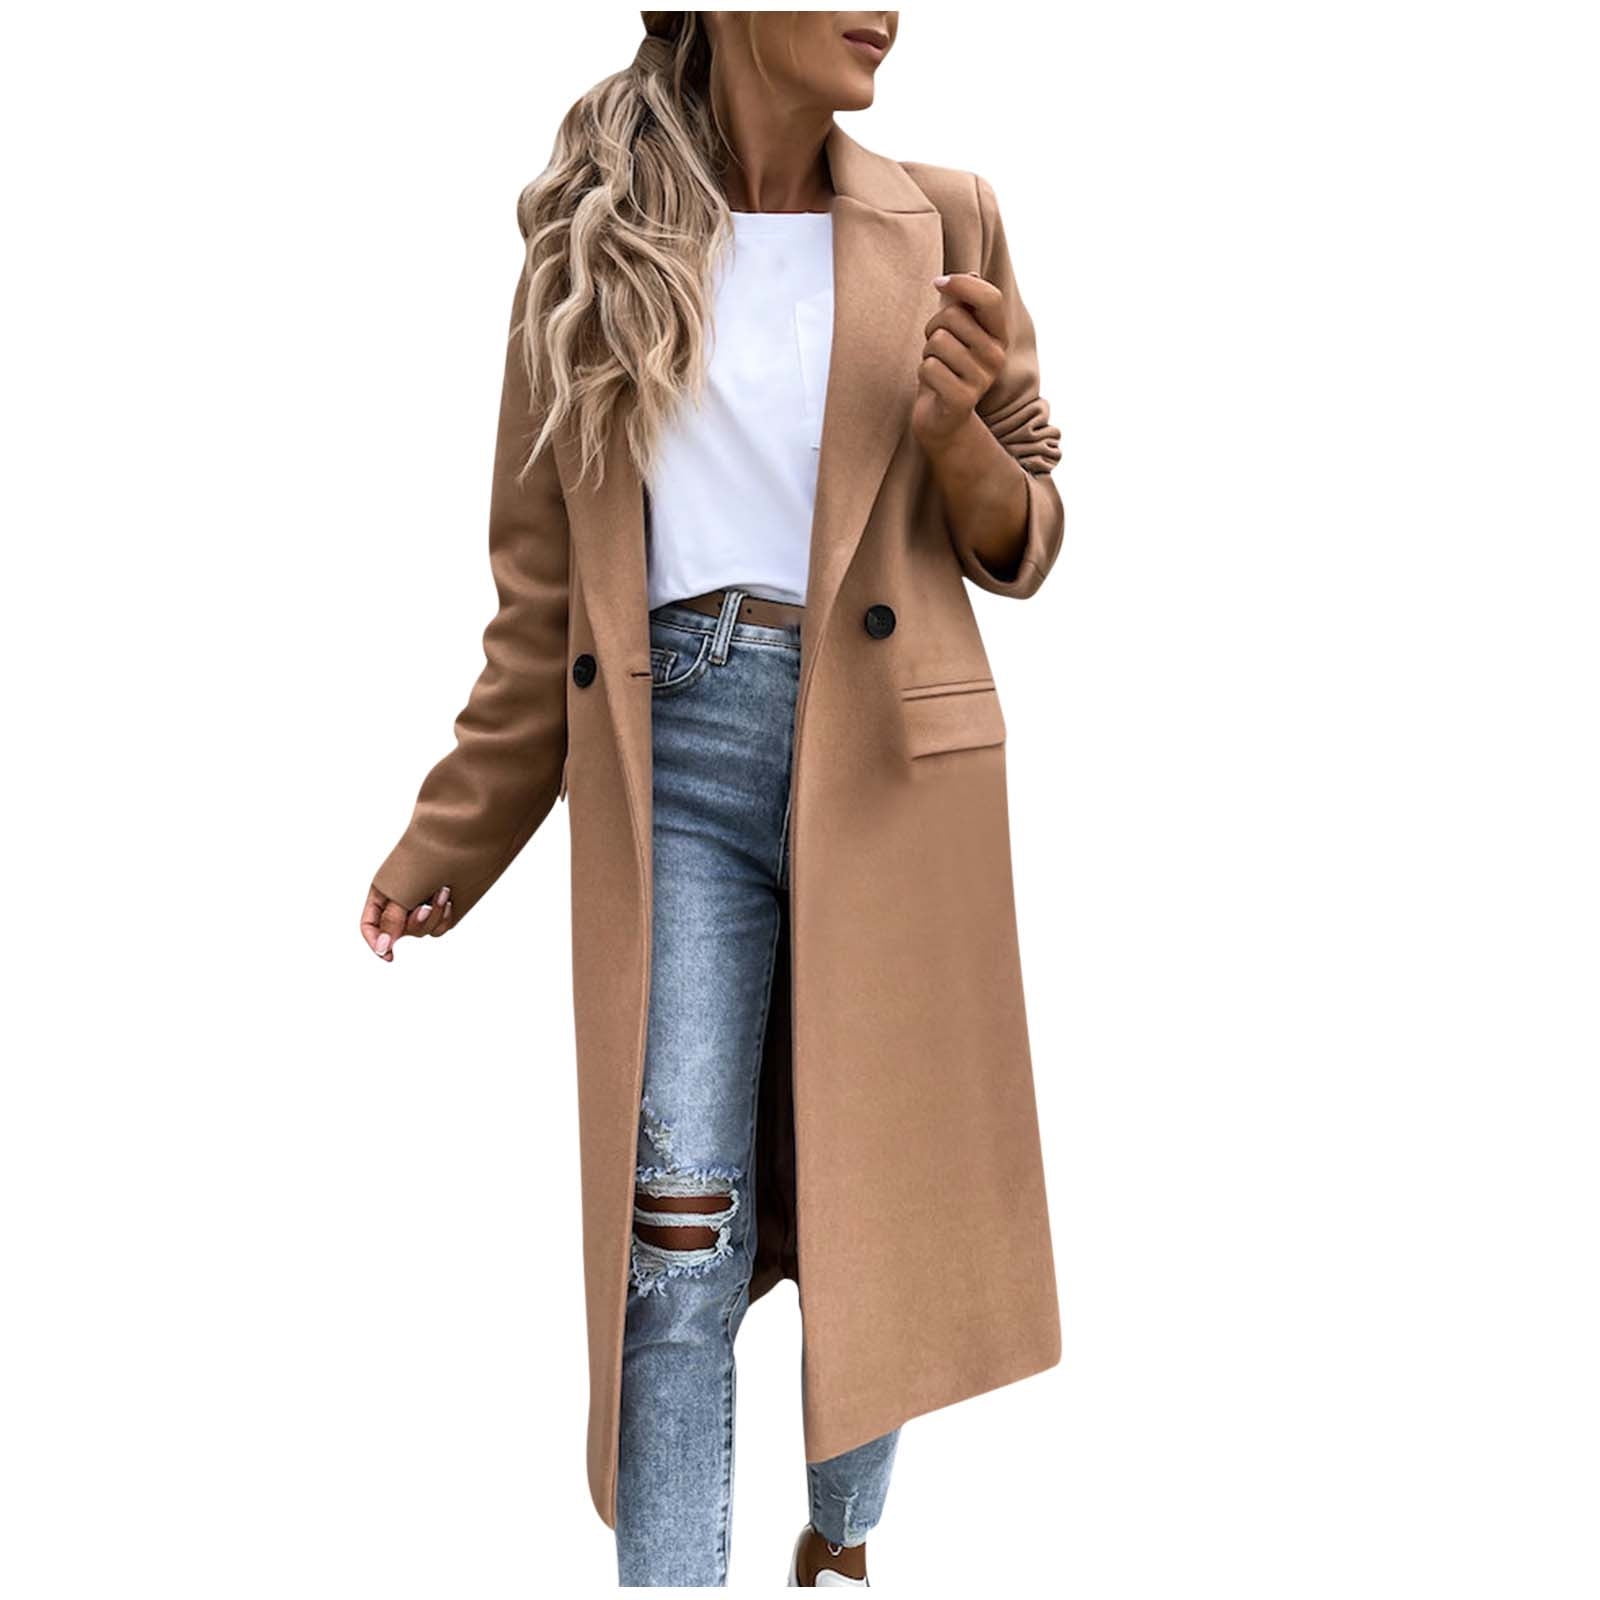 Hfyihgf Women's Elegant Trench Coat Notched Lapel Double Breasted Wool ...